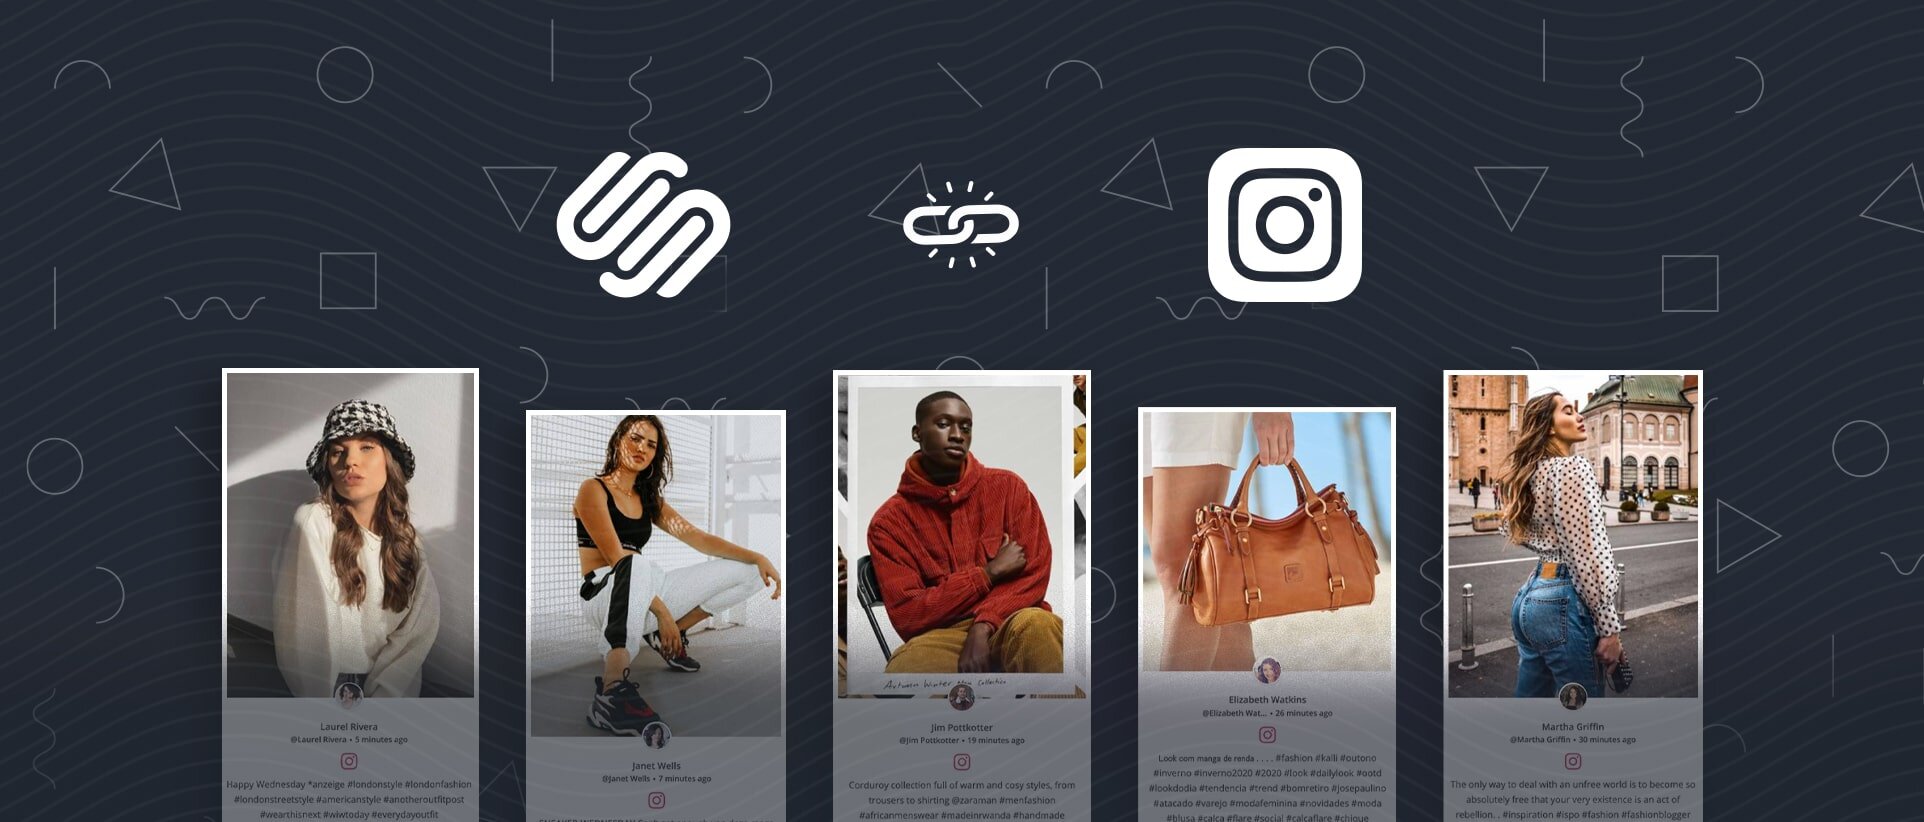 instagram feed on squarespace